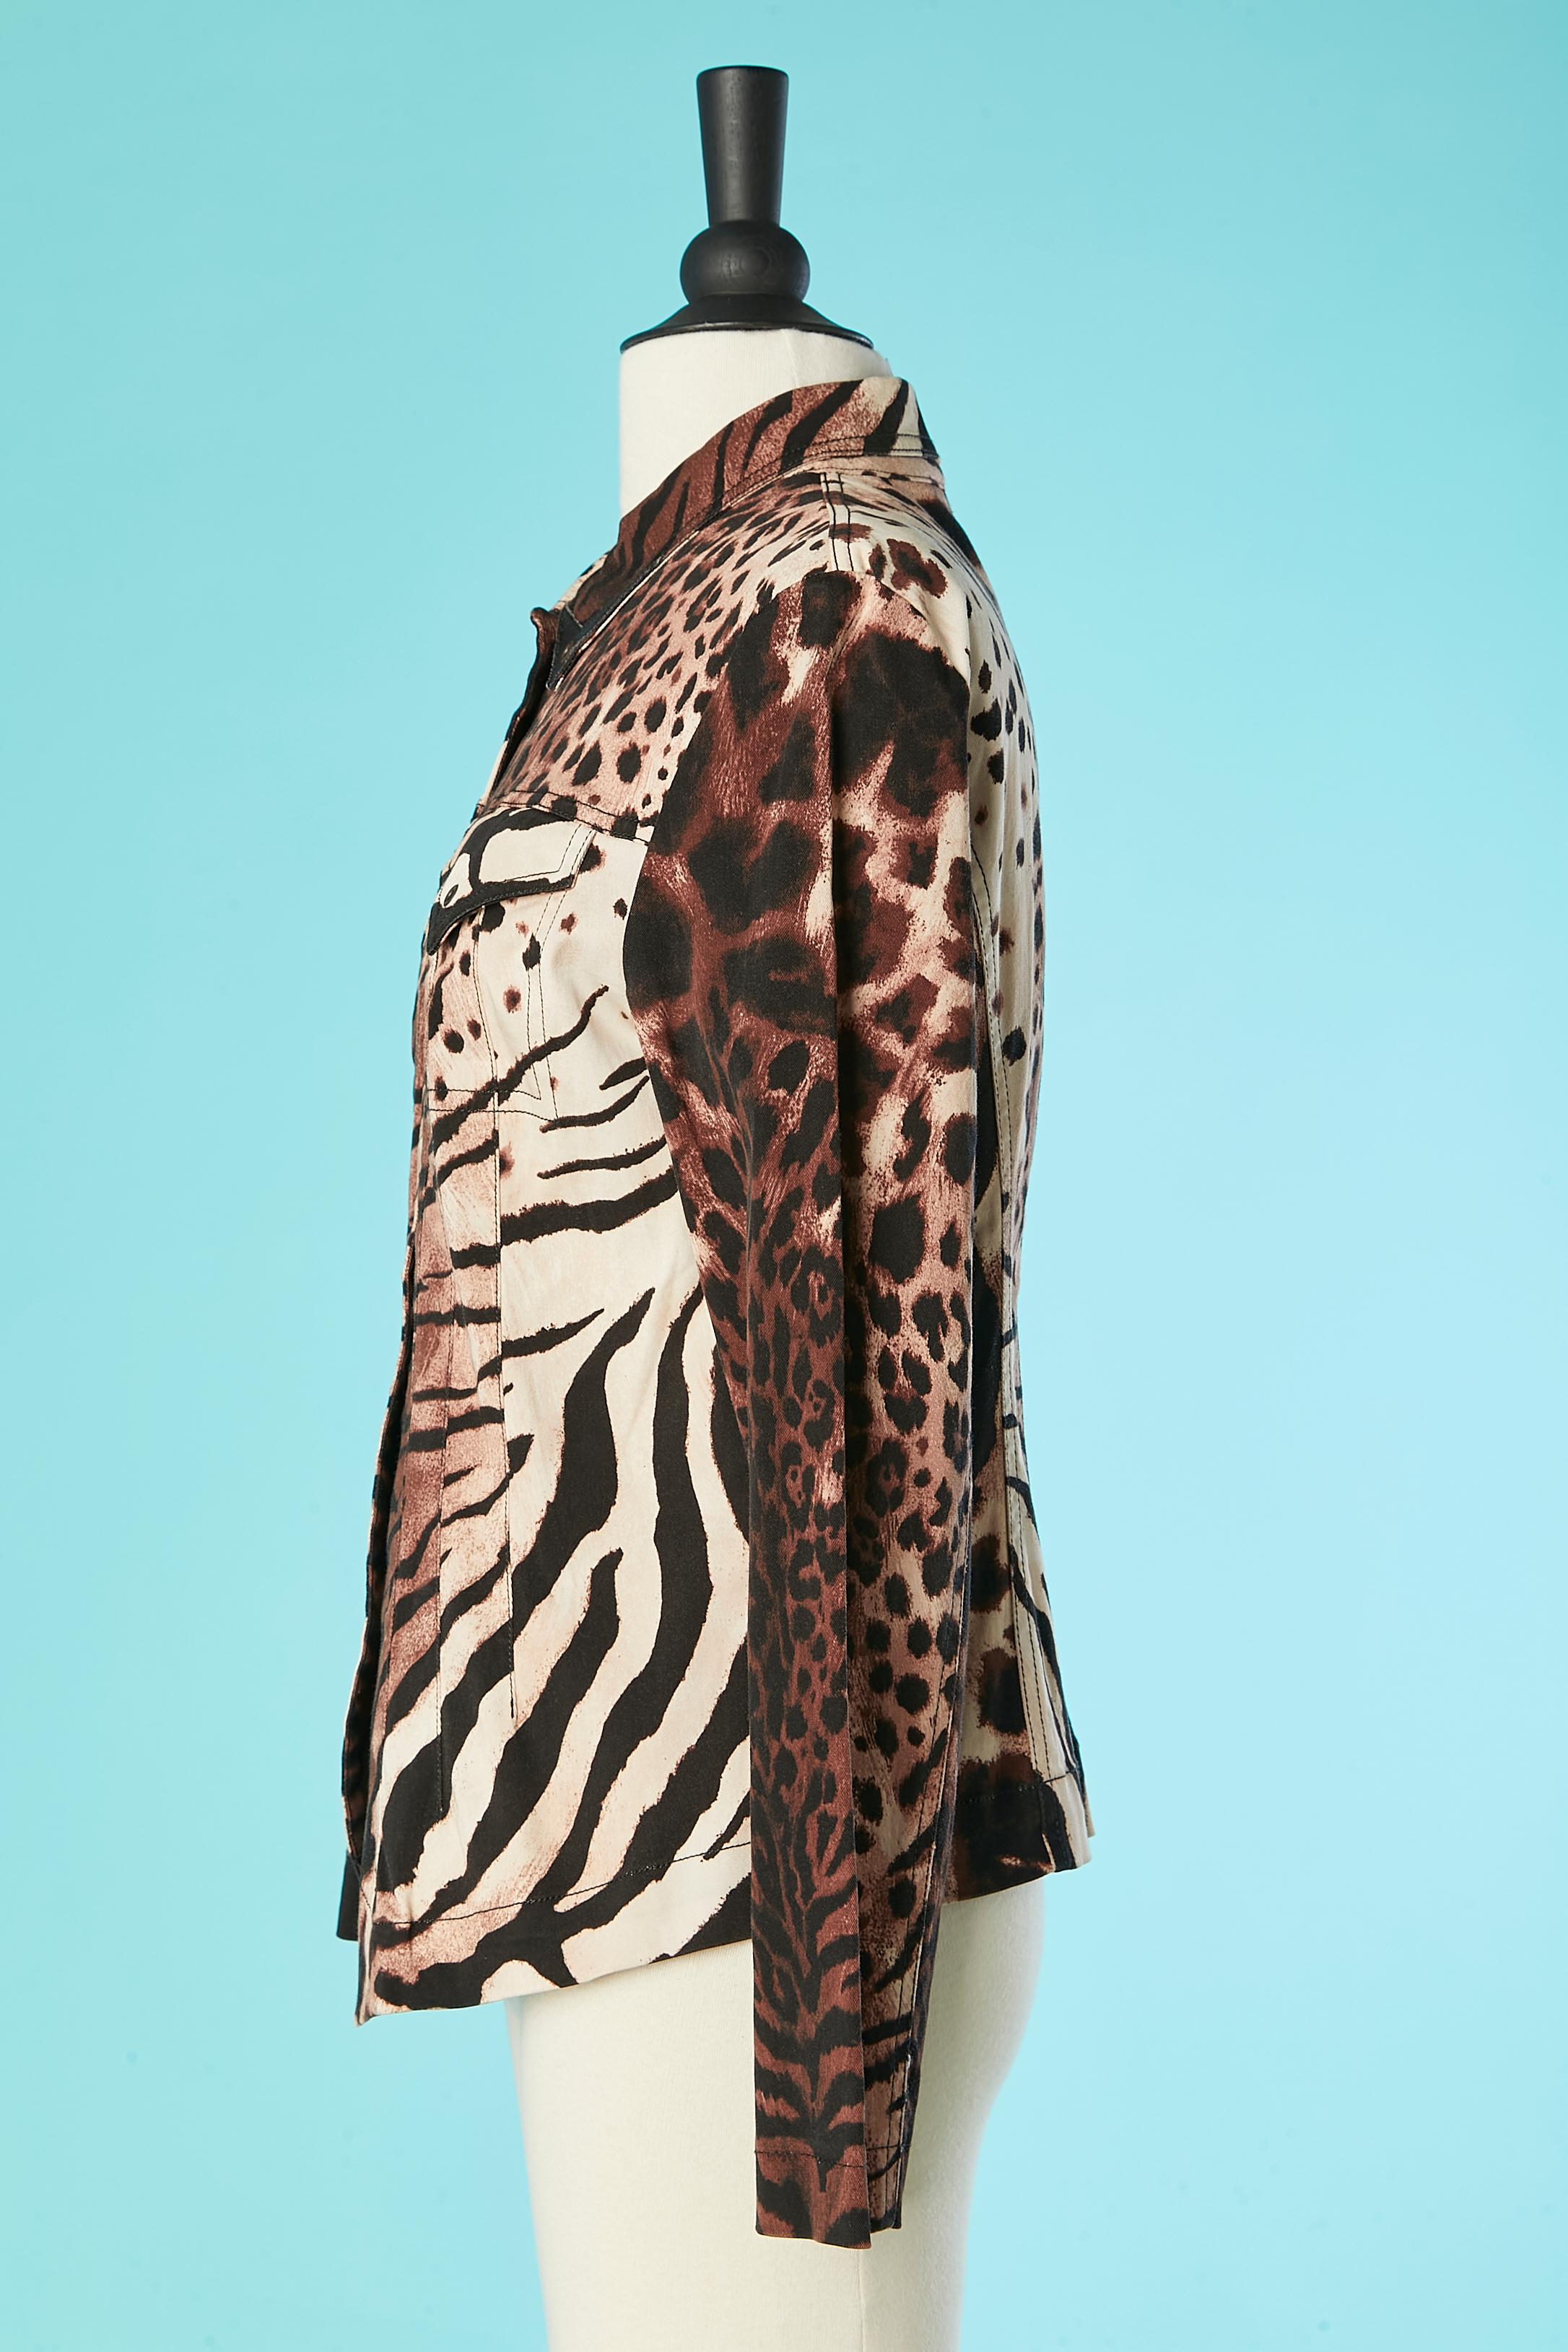 Animal printed shirt with leather details Kenzo Jeans  In Excellent Condition For Sale In Saint-Ouen-Sur-Seine, FR